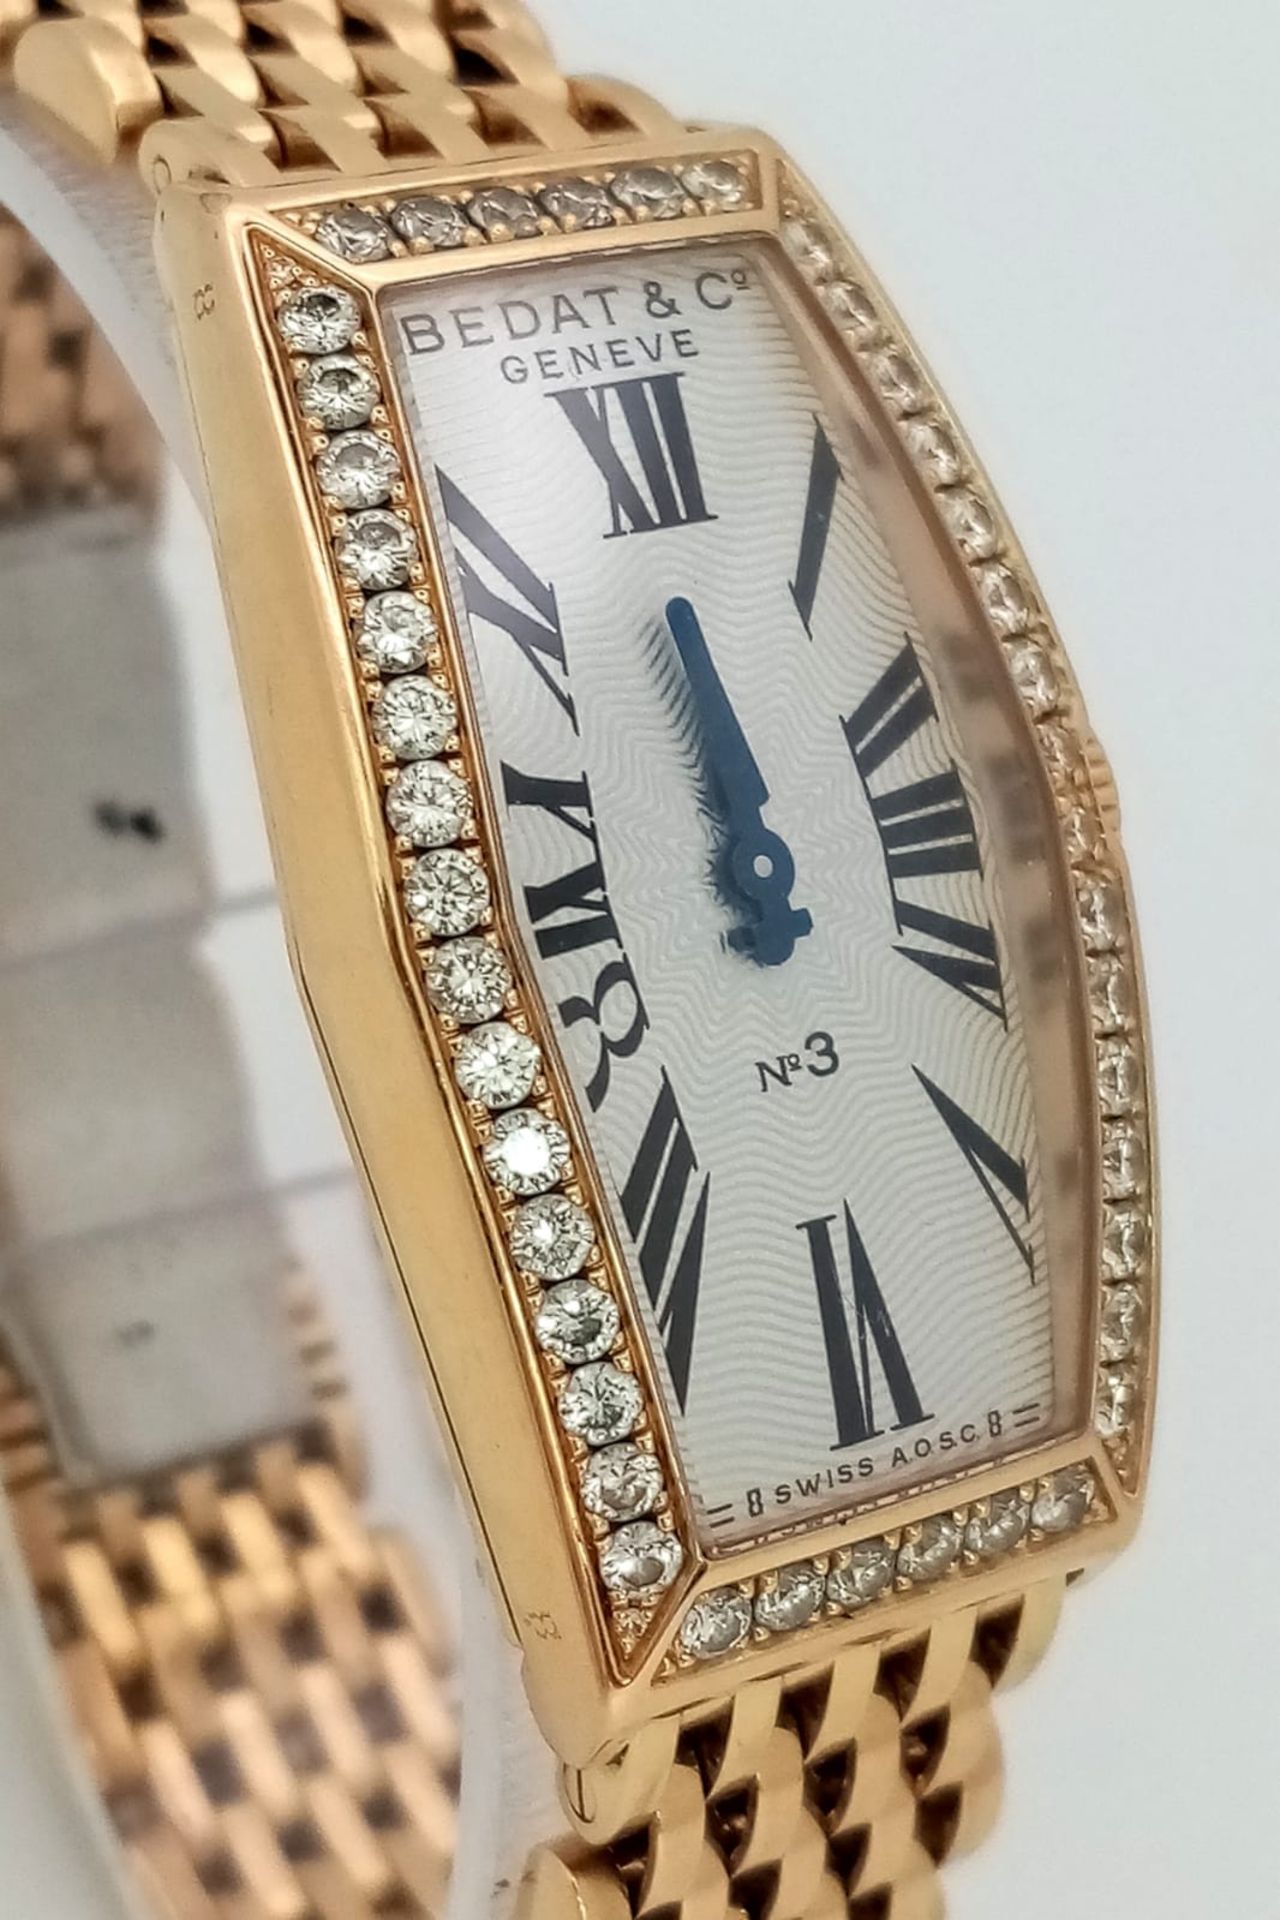 A BEDAT AND CO 18K GOLD LADIES WRIST WATCH WITH DIAMOND BEZEL AND SOLID 18K GOLD STRAP, UNIQUE - Image 2 of 7